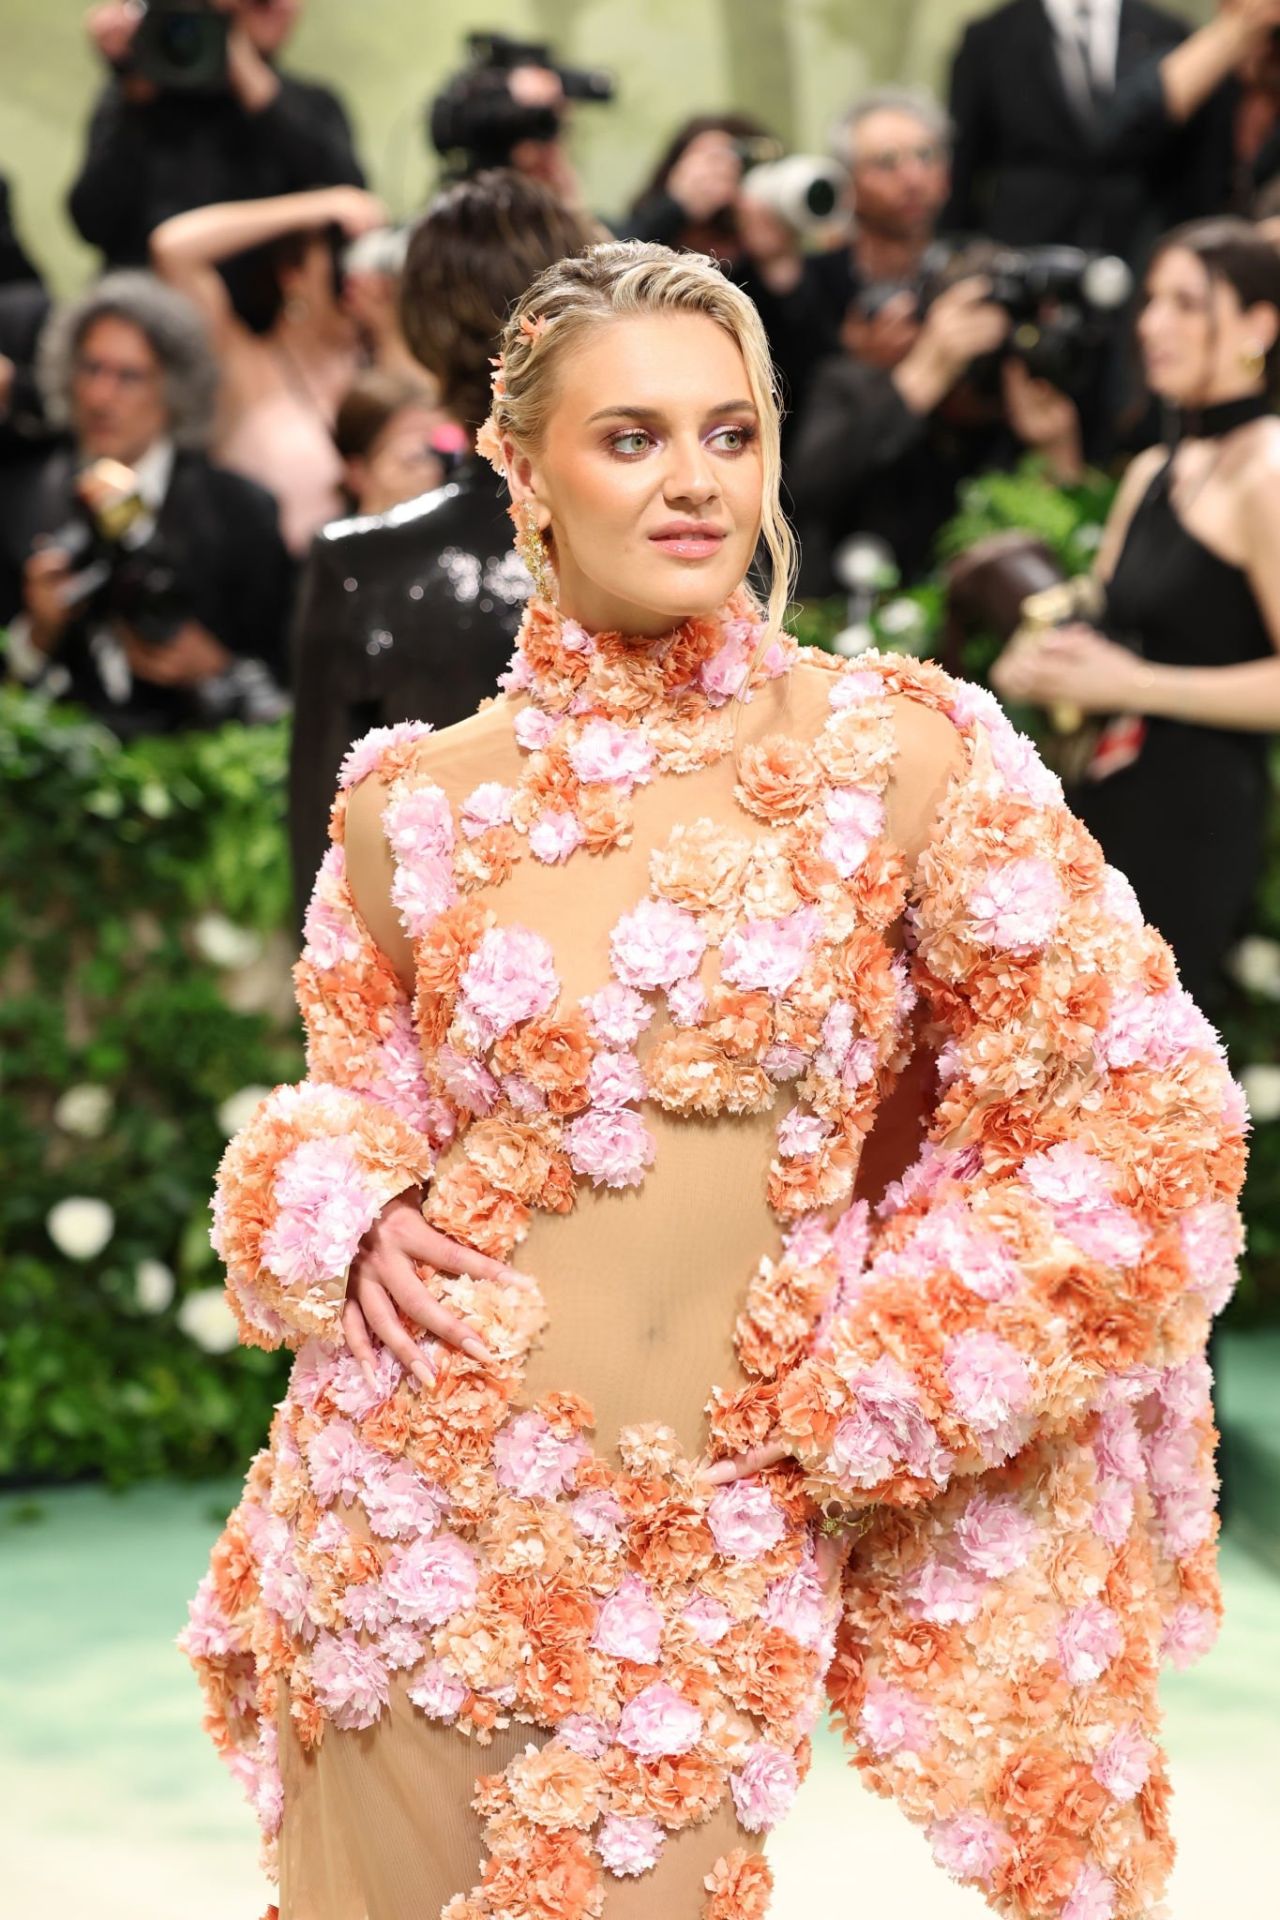 KELSEA BALLERINI AND CHASE STOKES MAKE A STUNNING DEBUT AT THE 2024 MET GALA IN NEW YORK05